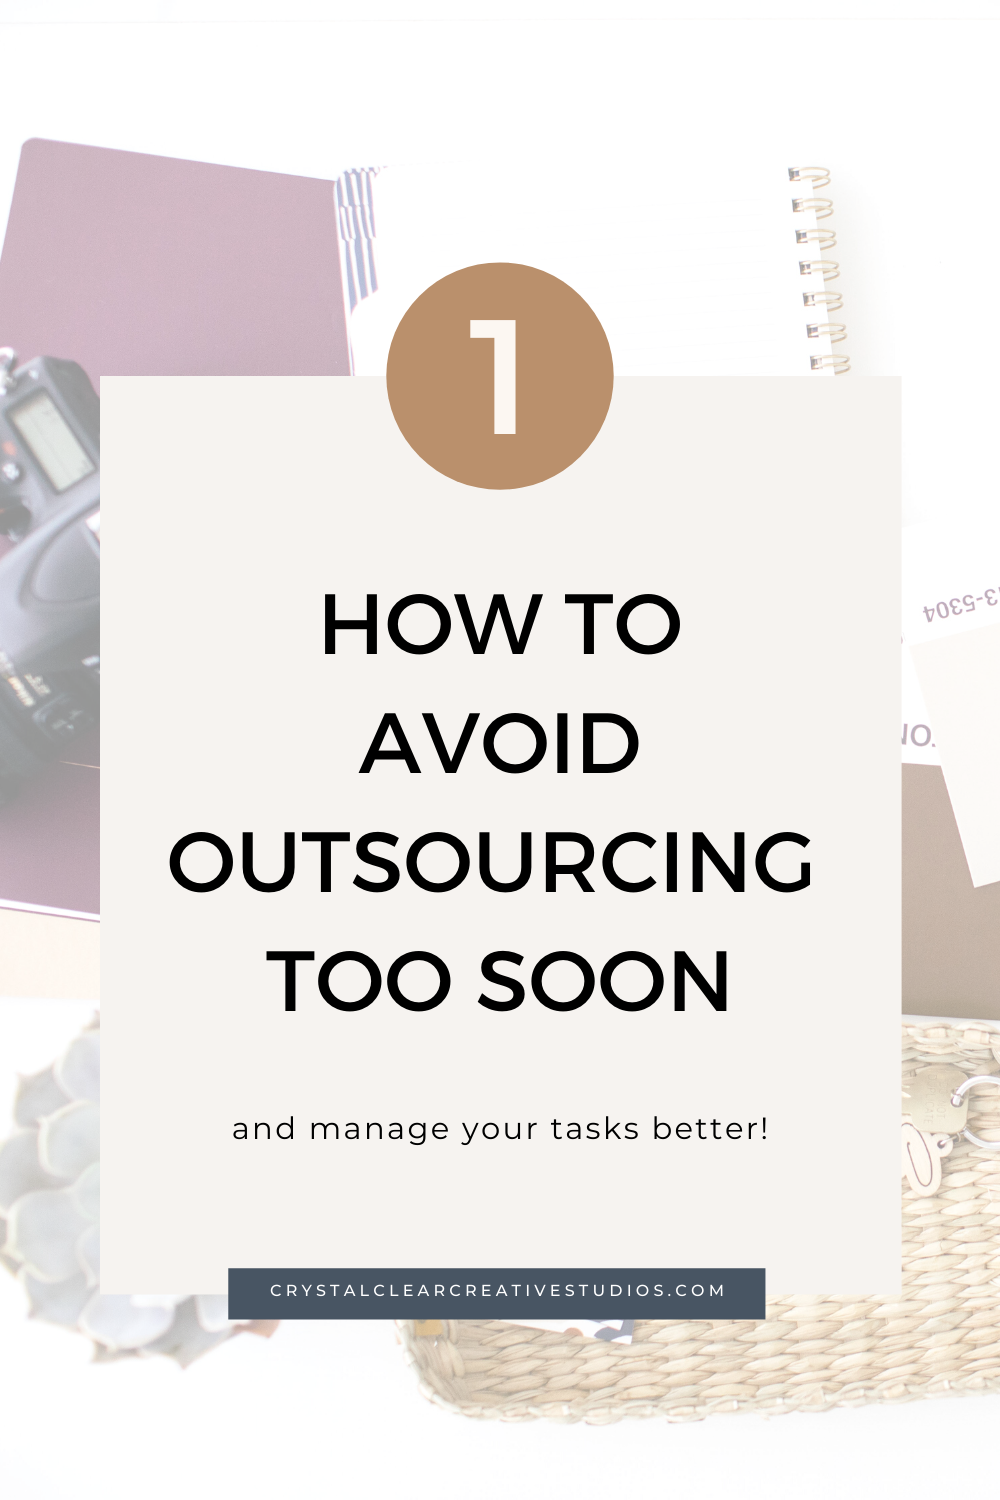 How to avoid outsourcing too soon!